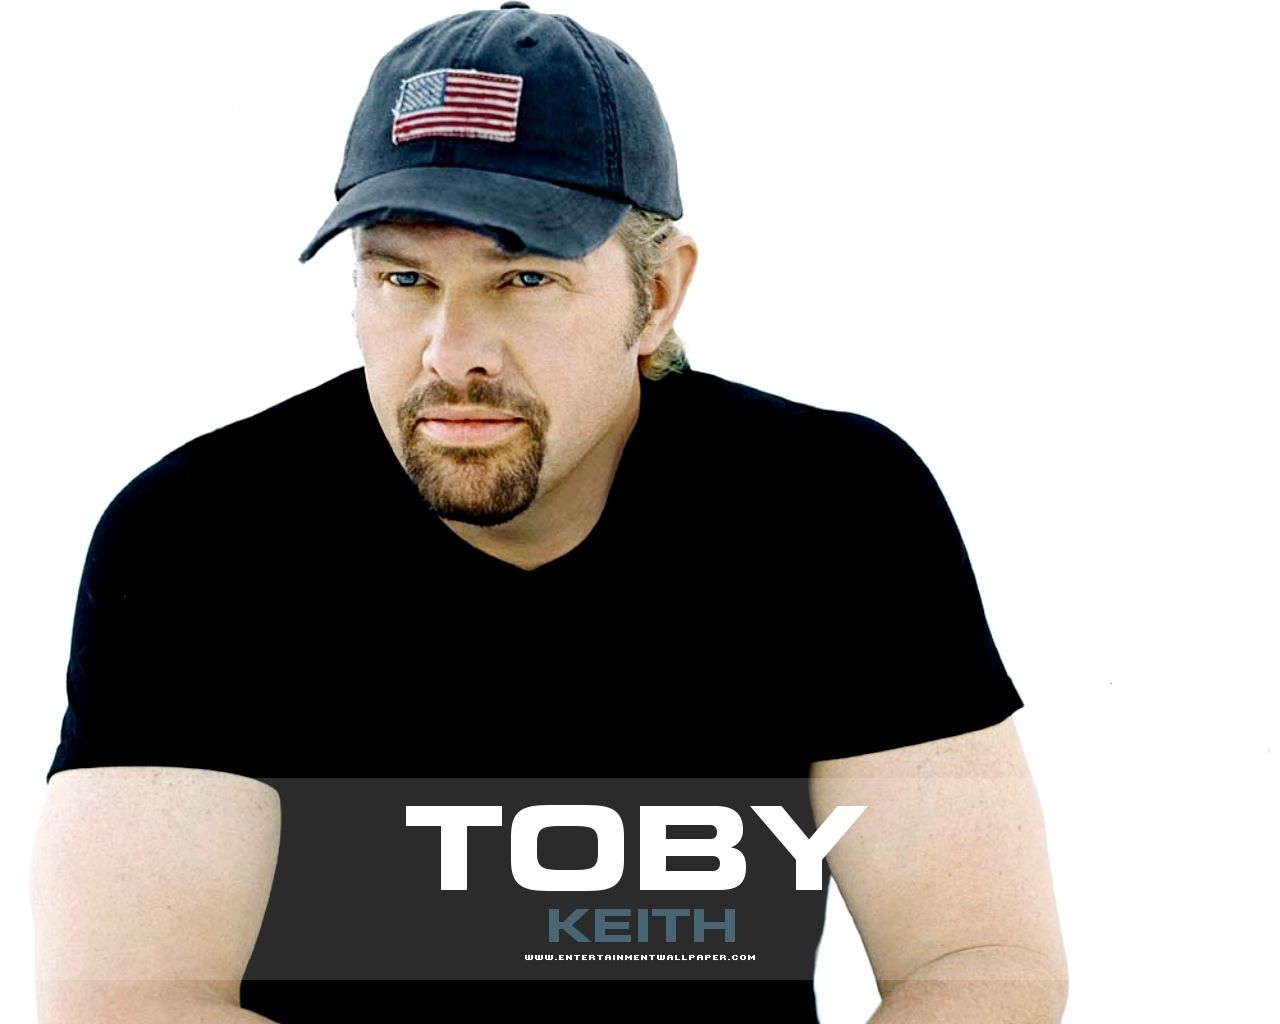 Toby Keith Toby keith wallpaper. Keith, Singer, Music legends